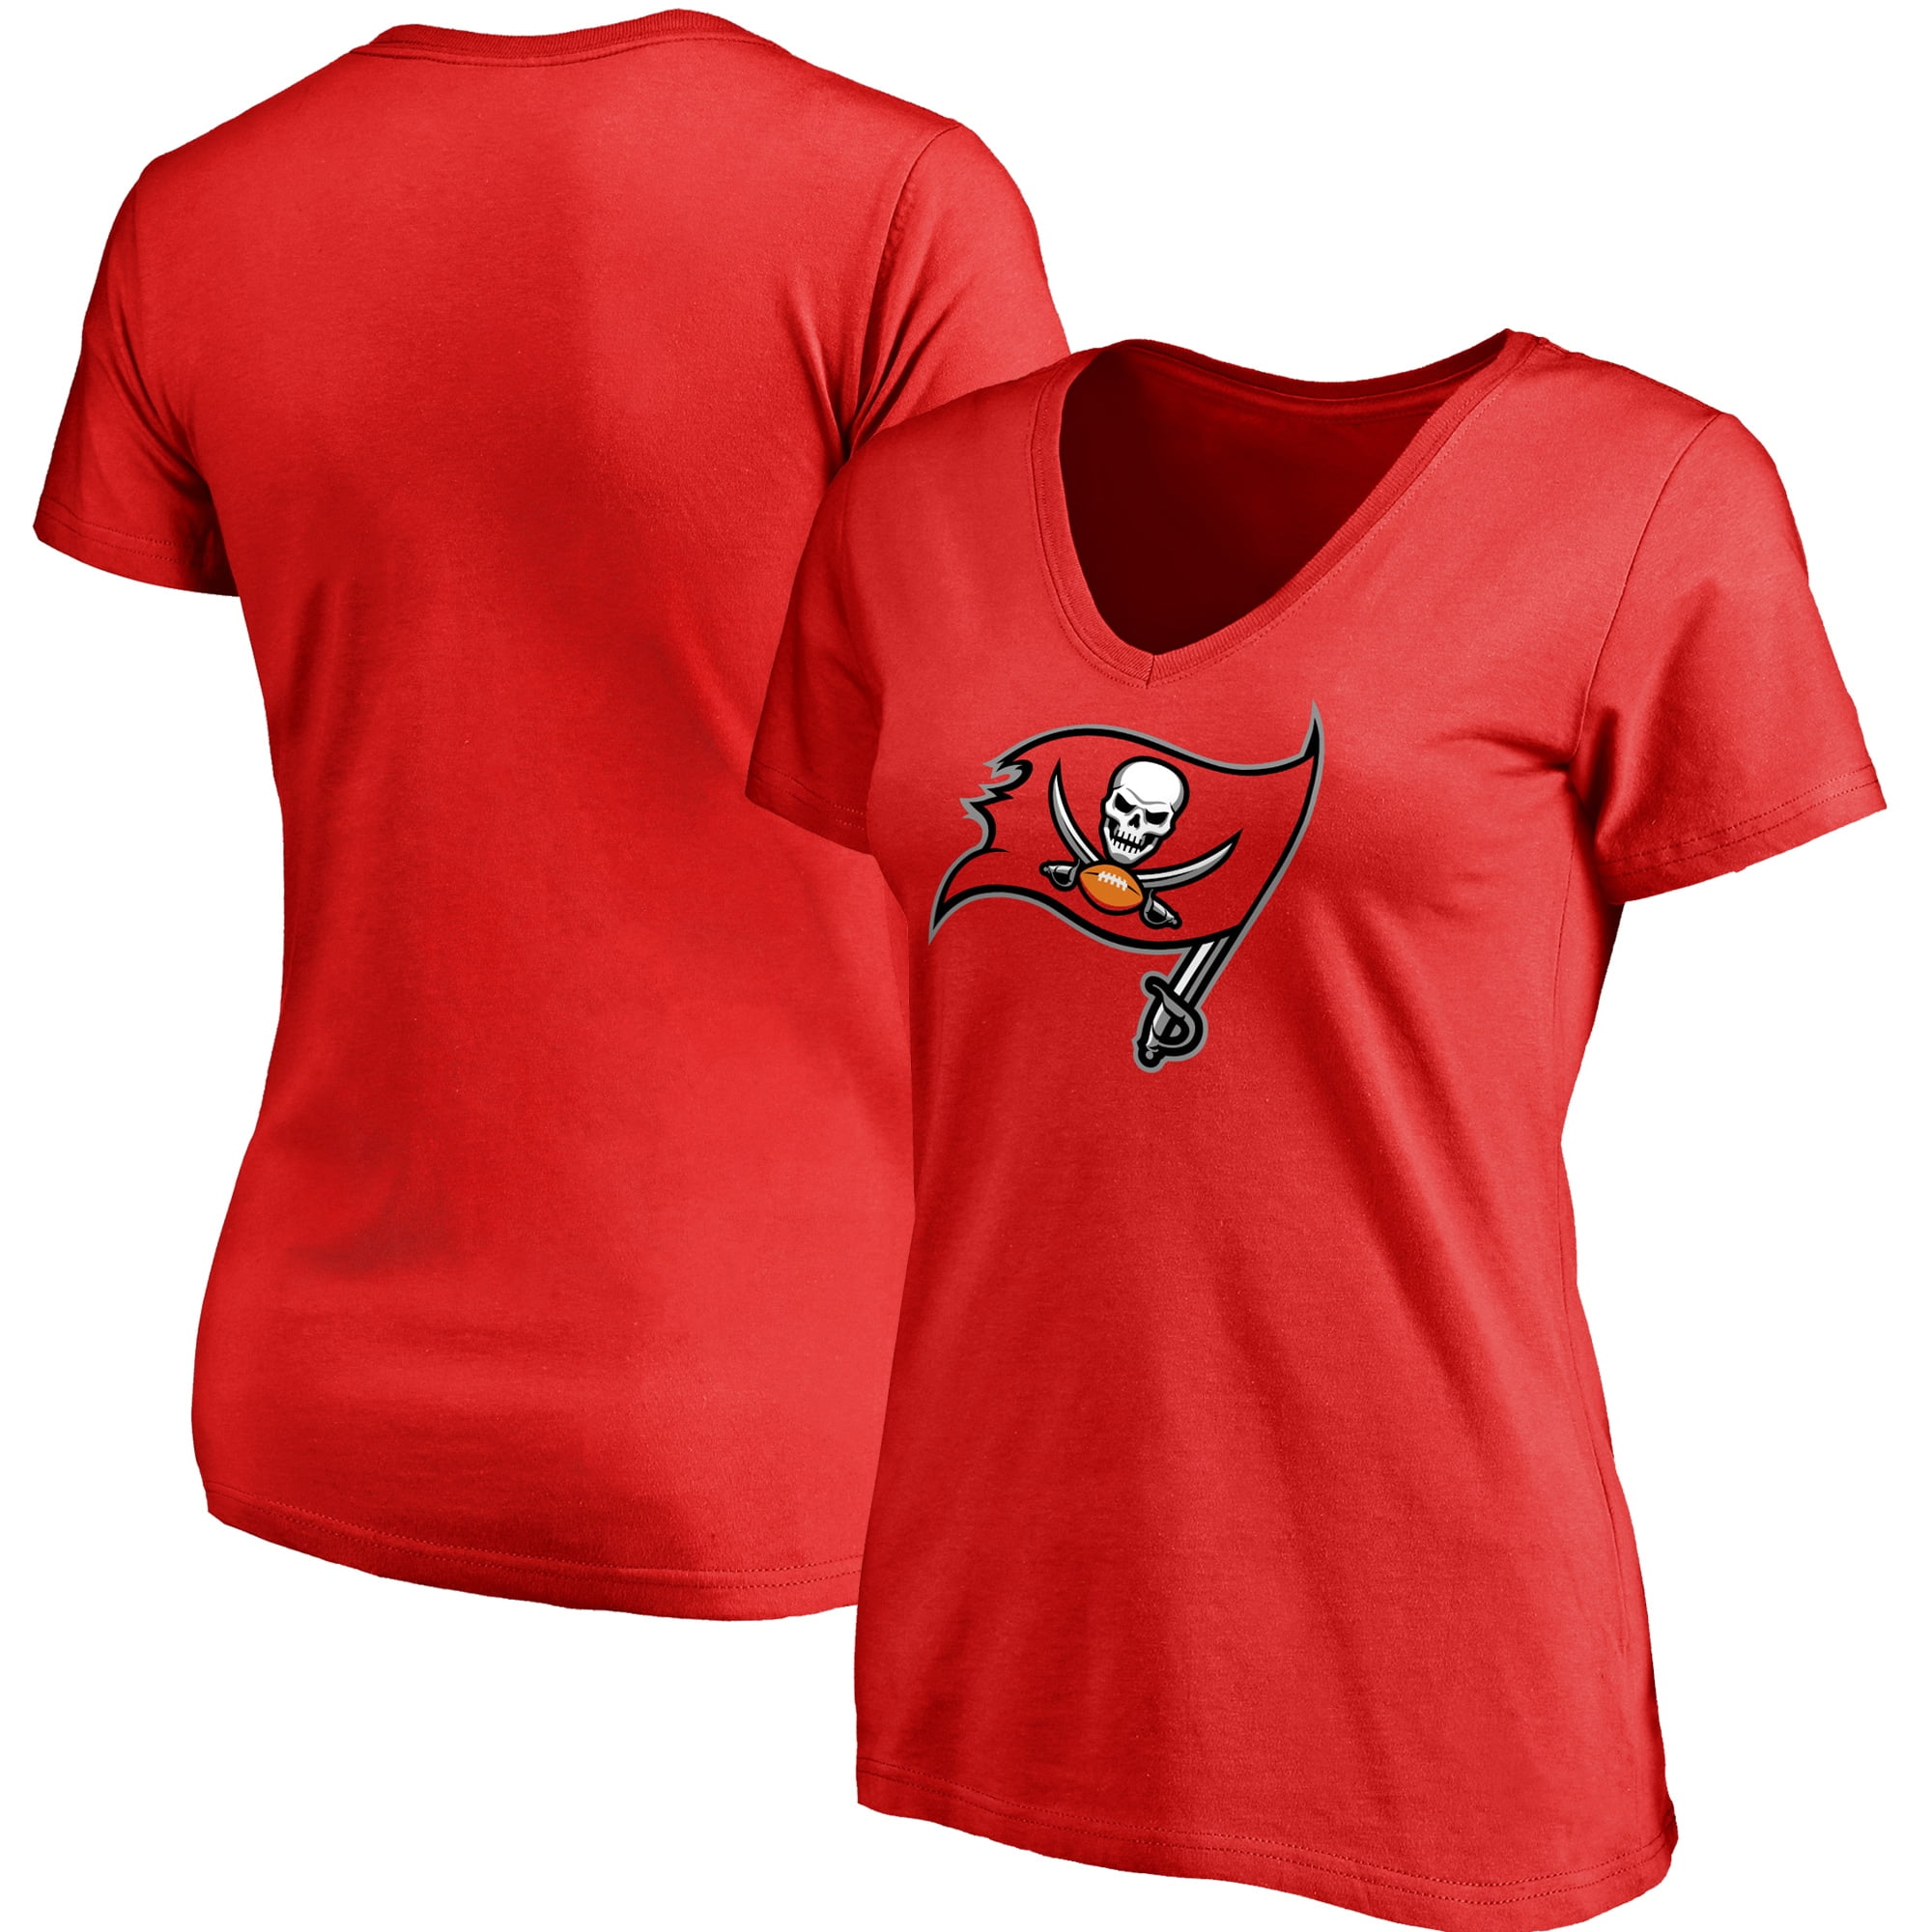 Women's NFL Pro Line Red Tampa Bay 